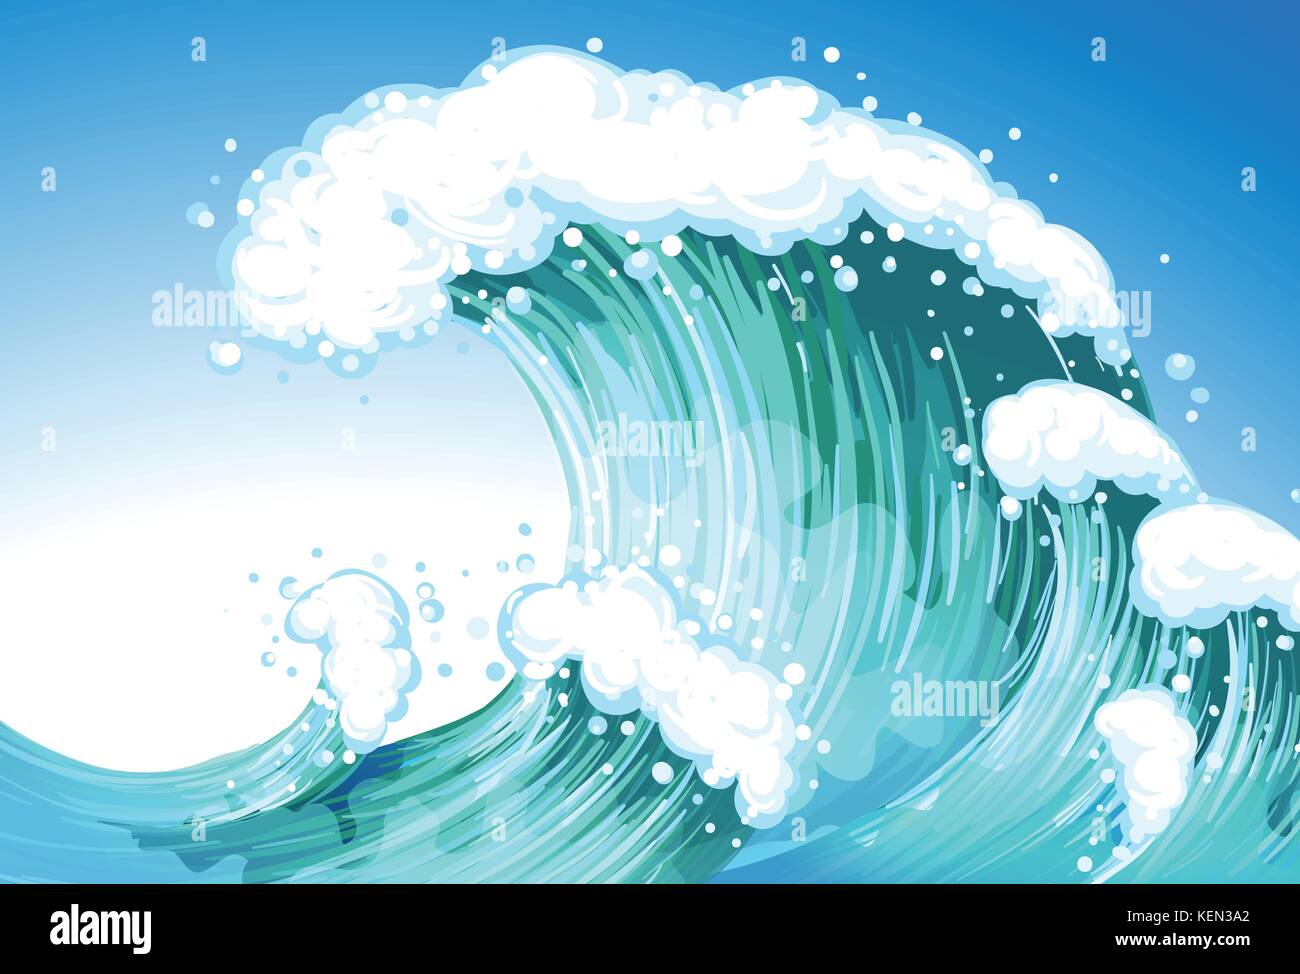 Illustration of a single big wave Stock Vector